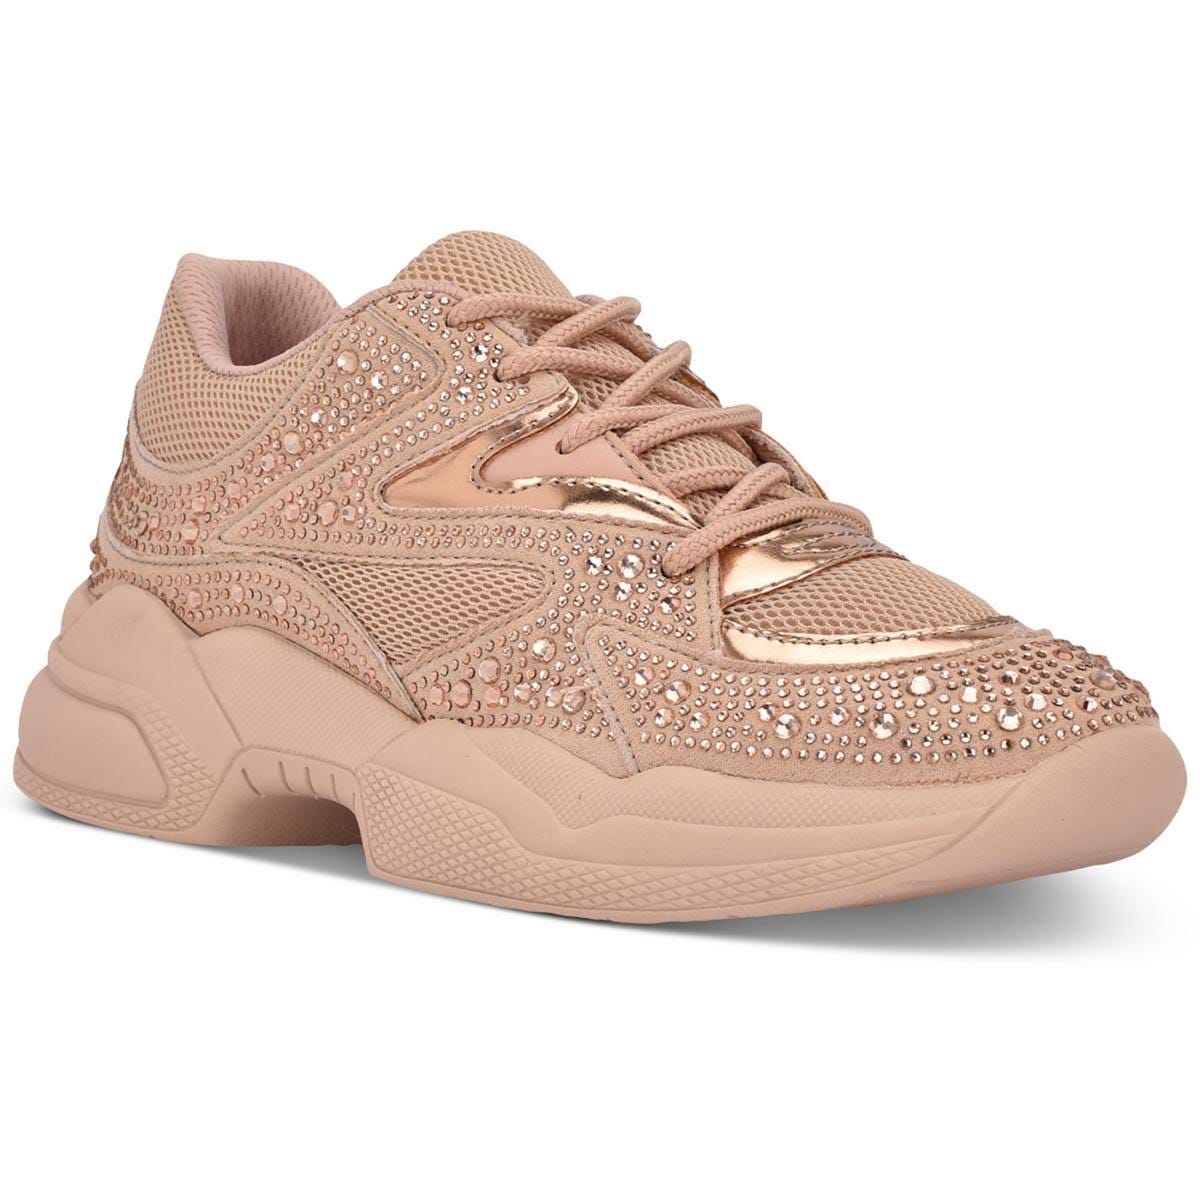 Sparkling Rhinestone Casual Sneakers for Women - Blush Bling | Image